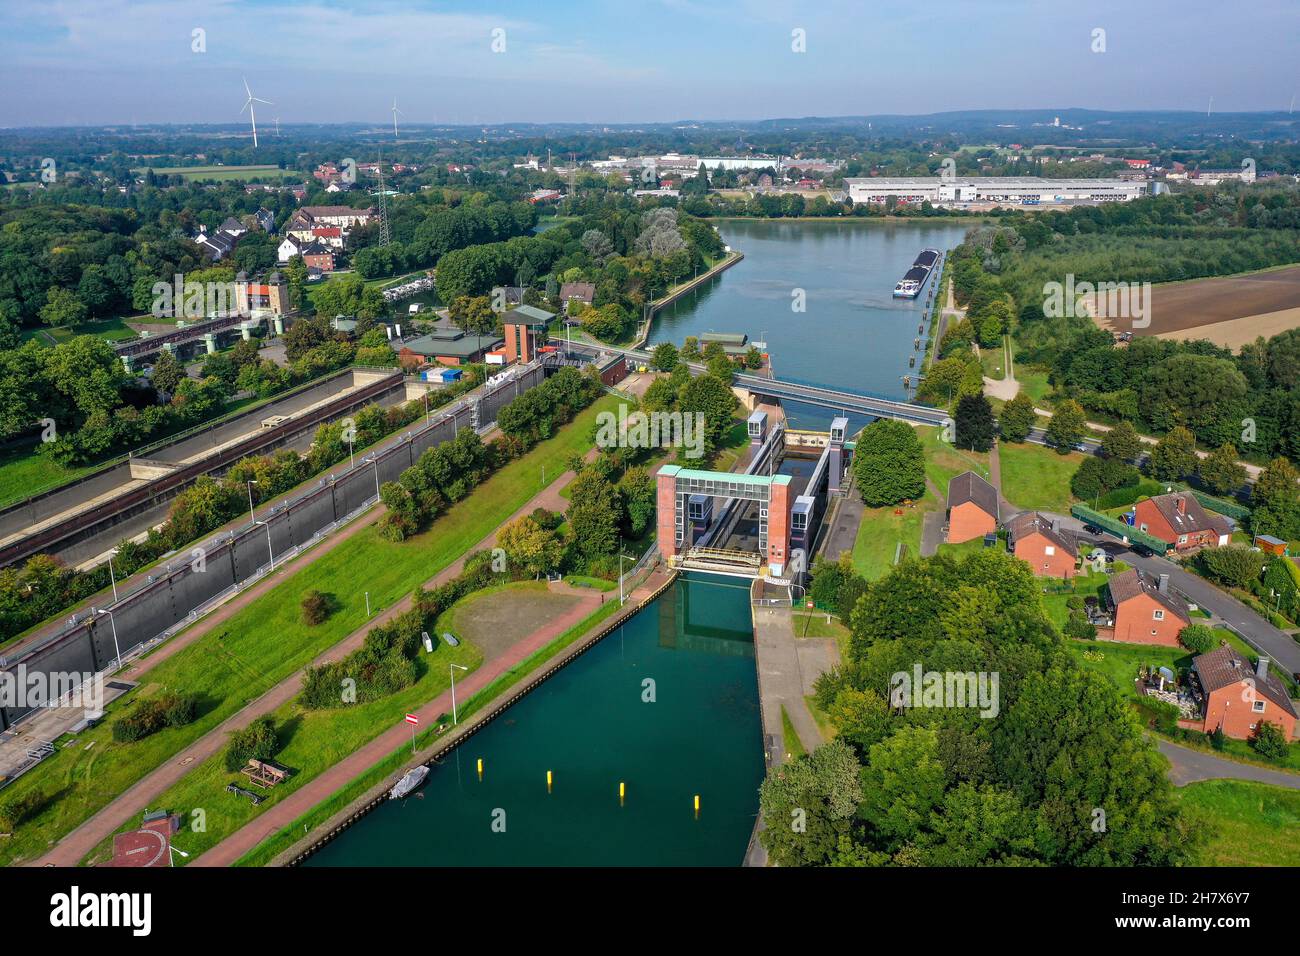 Waltrop, North Rhine-Westphalia, Germany - Waltrop ship lift and lock park. Waltrop Lock Park is the name given to the four descent structures at the Stock Photo